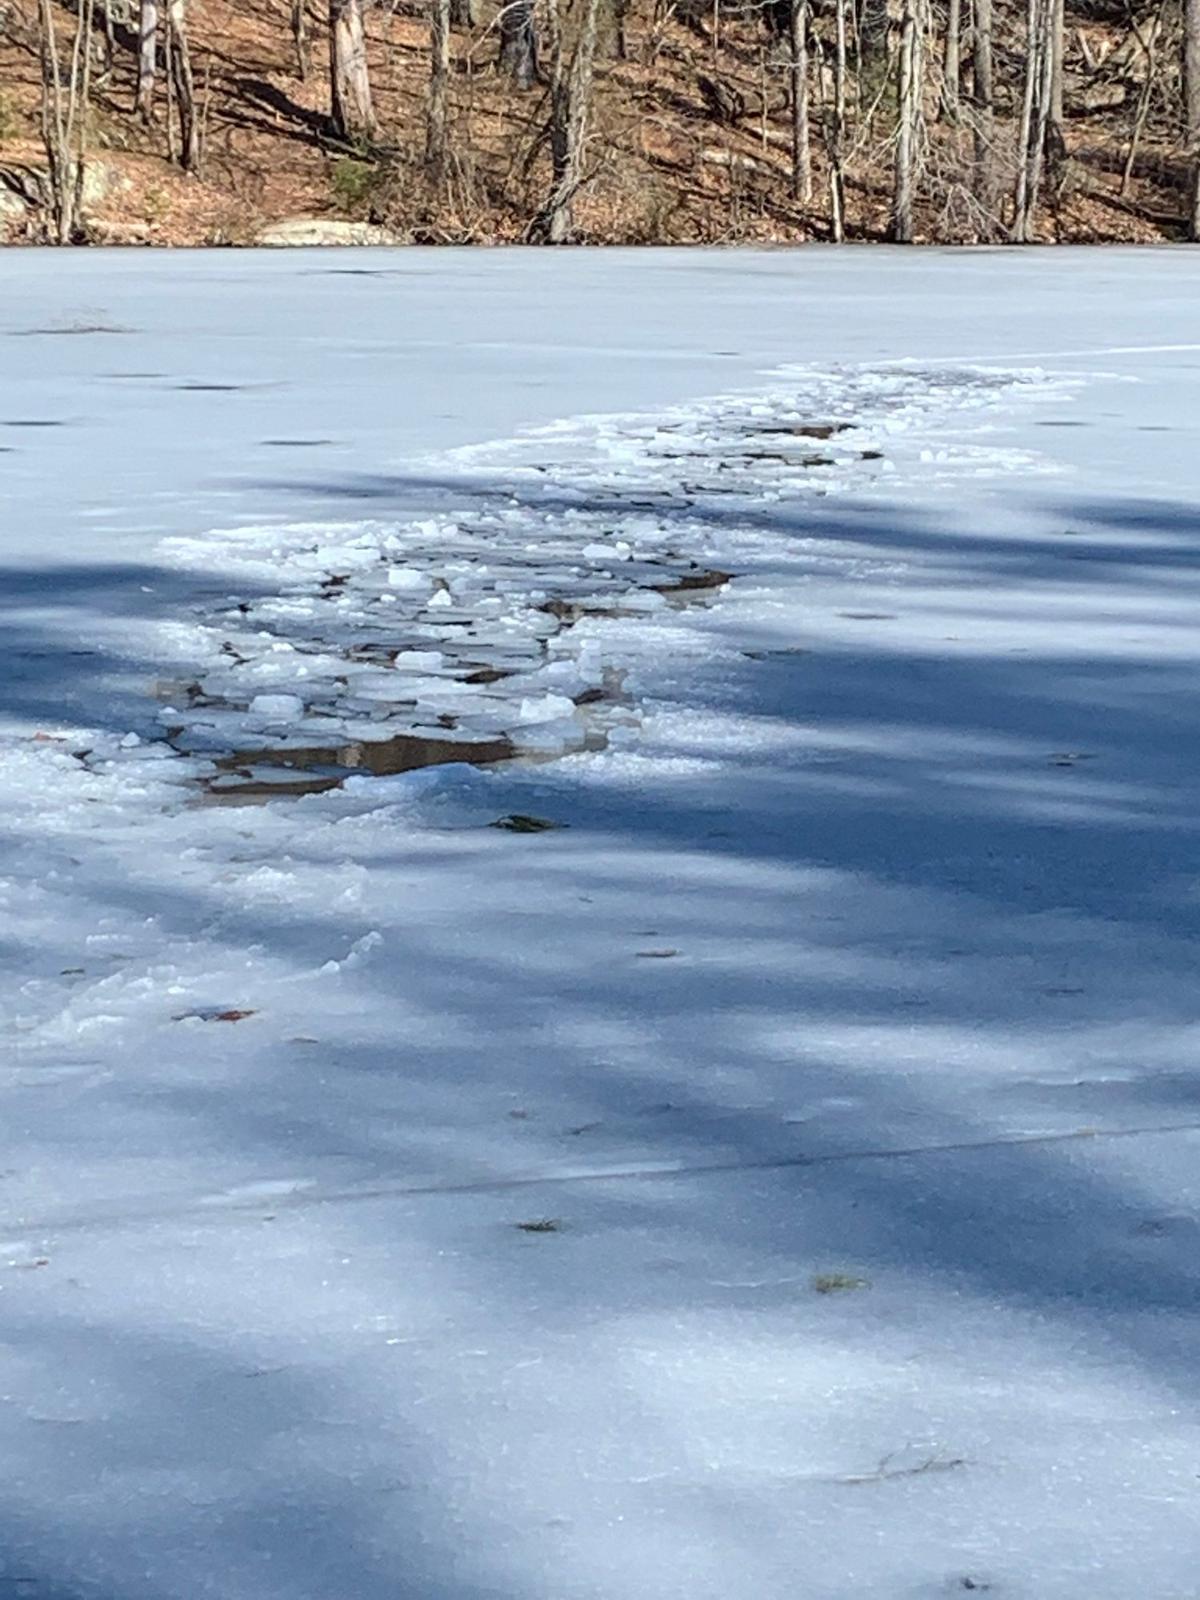 The man was able to crawl toward the shore so that Thomas Walsh and another passerby could use a branch to help pull him to shore. (Courtesy of <a href="https://stonehamfire.com/2021/03/10/stoneham-fire-department-responds-after-man-falls-through-ice-at-quarter-mile-pond/">Stoneham Fire Department</a>)